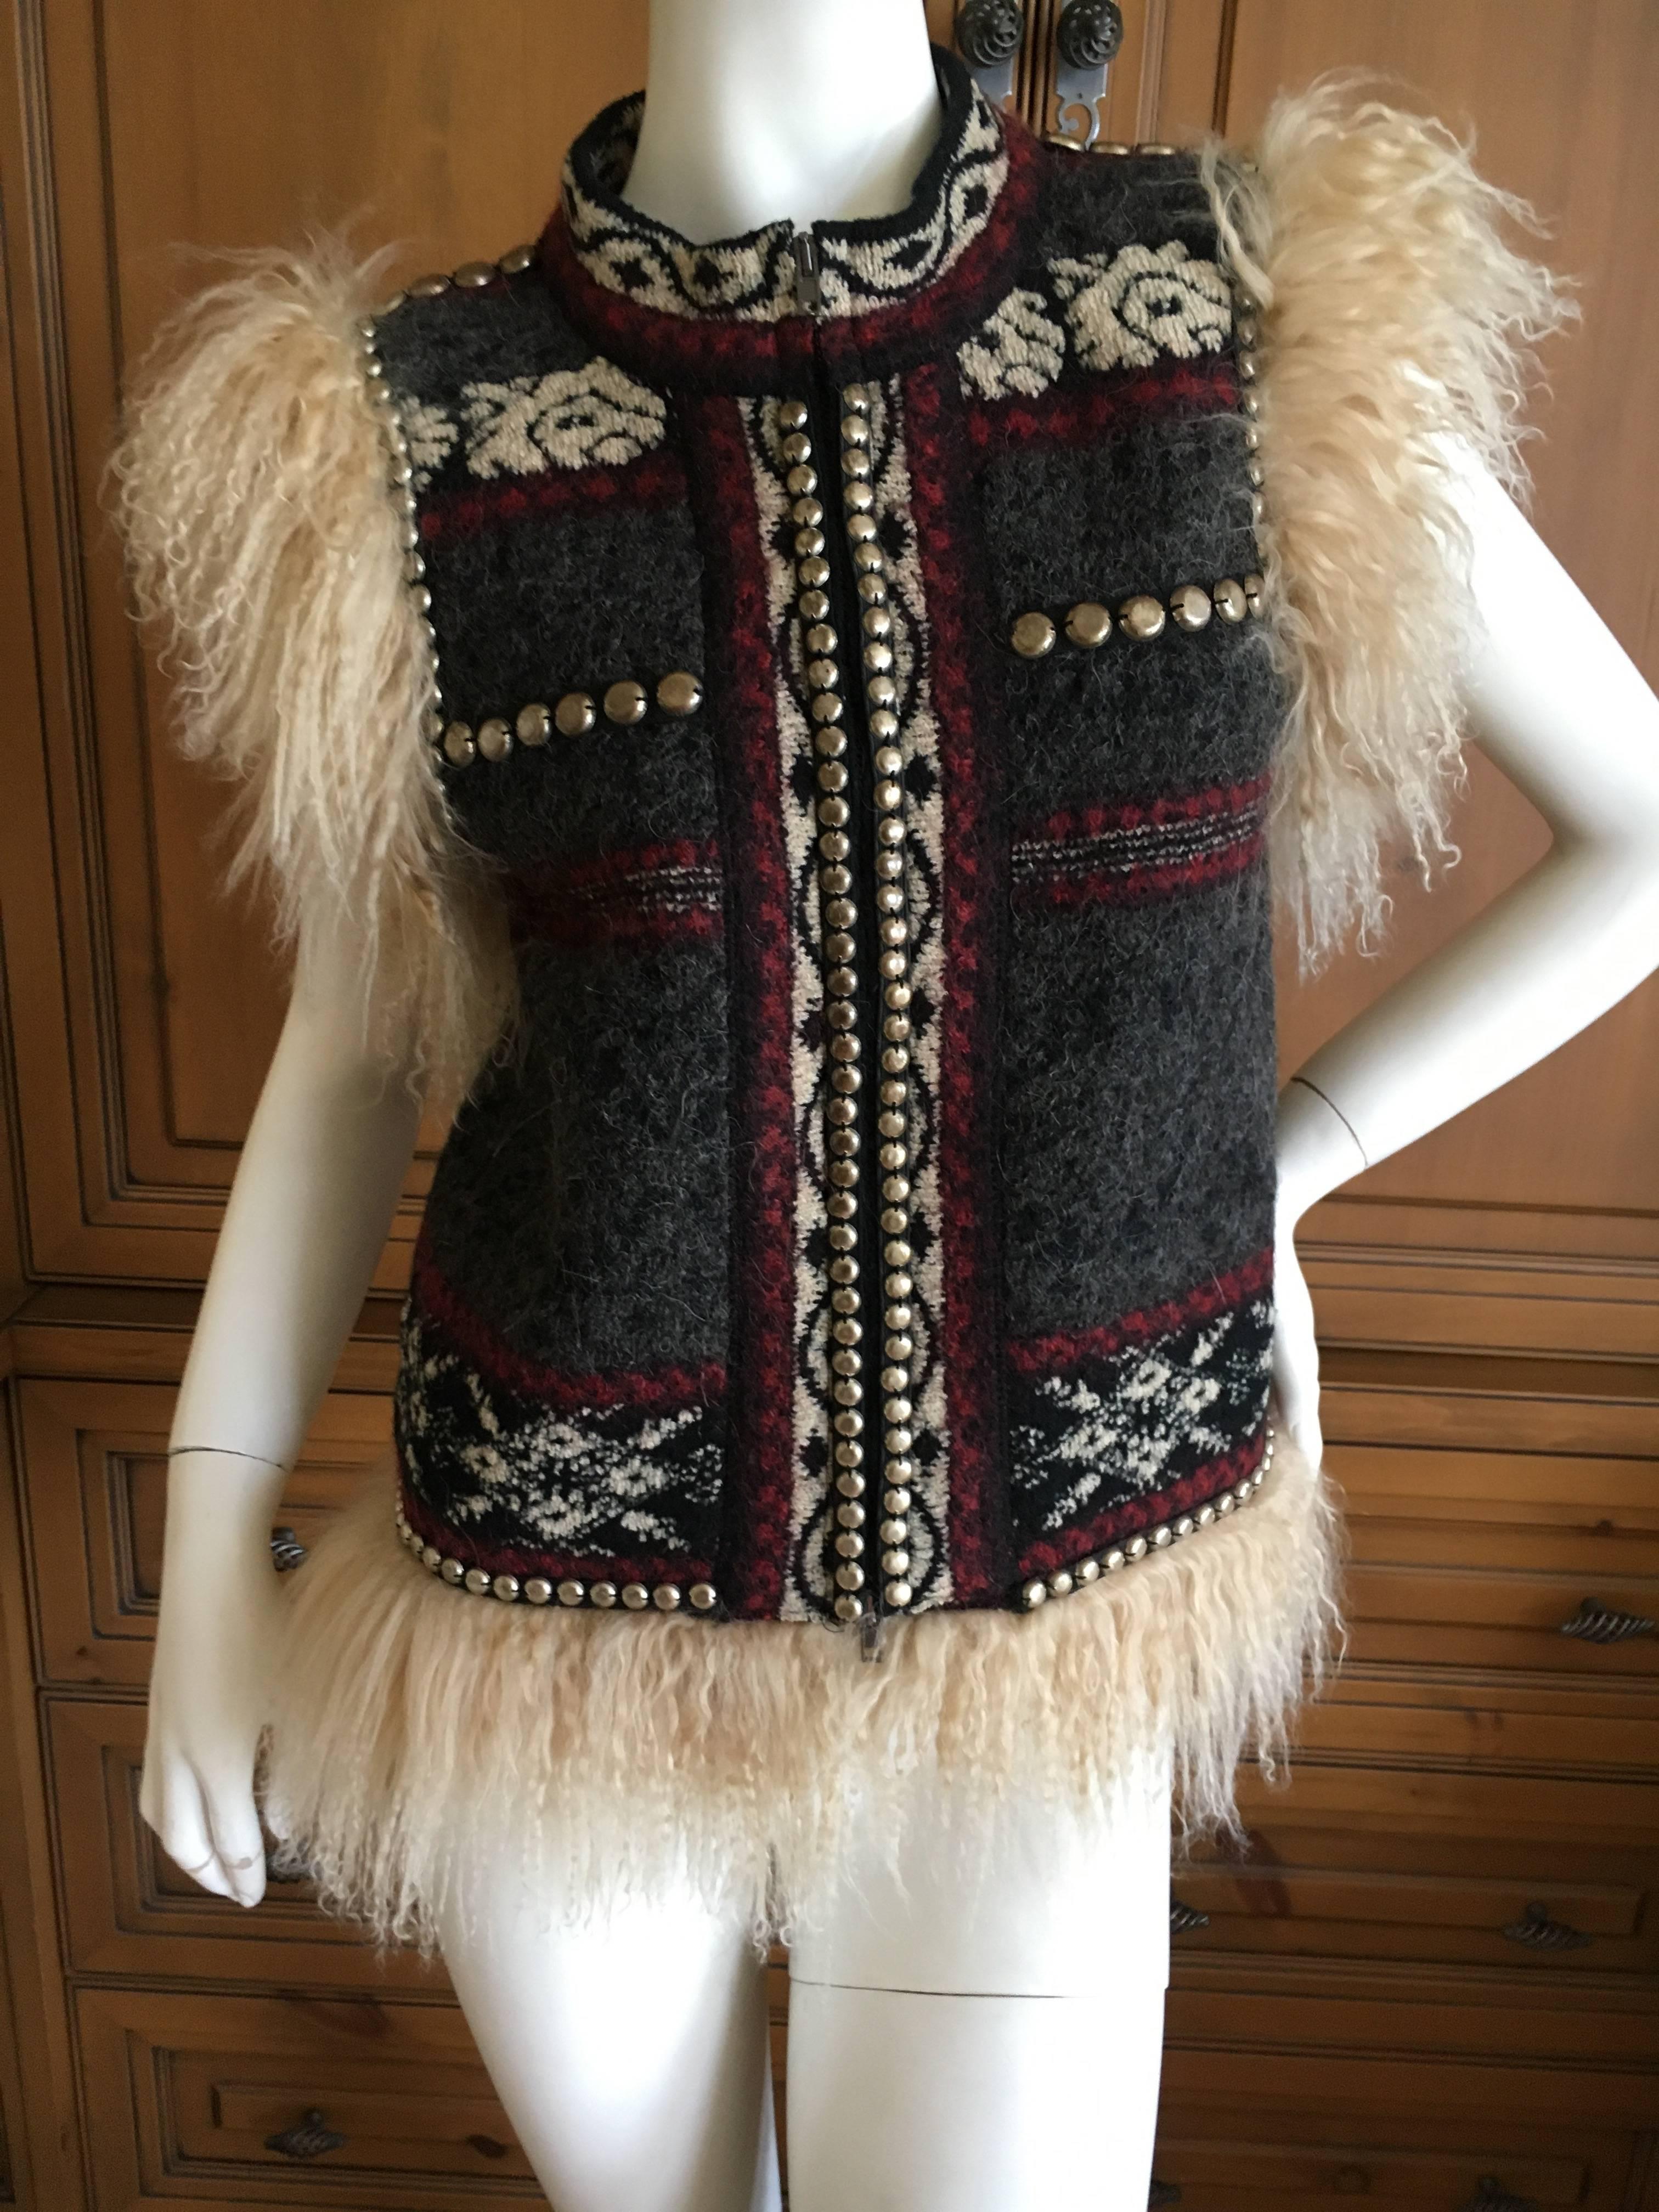 Terrific Vintage Jean Paul Gaultier Maille Femme Studded Boho Ethnic Vest with Curly Lamb Trim.
Size small but seems to run large
Bust 36